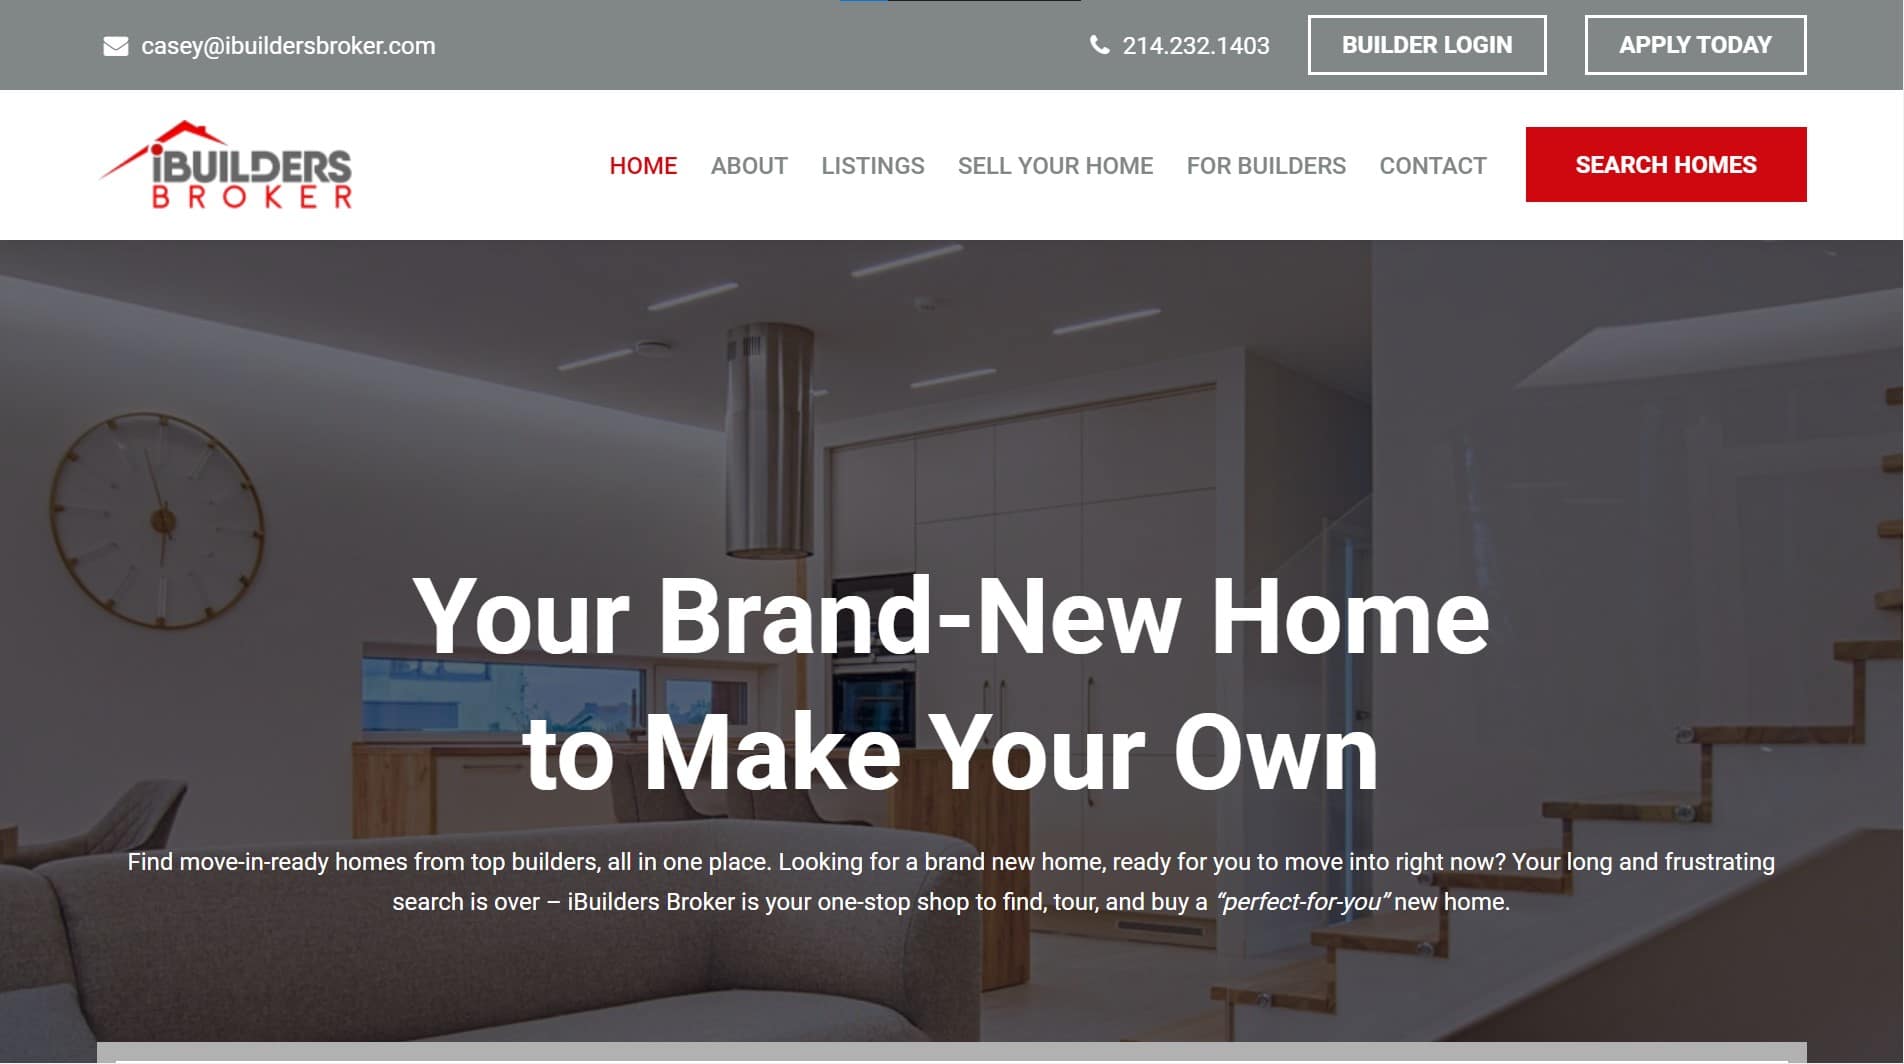 How iBuildersbroker Is Attracting More Customers With Their New Website